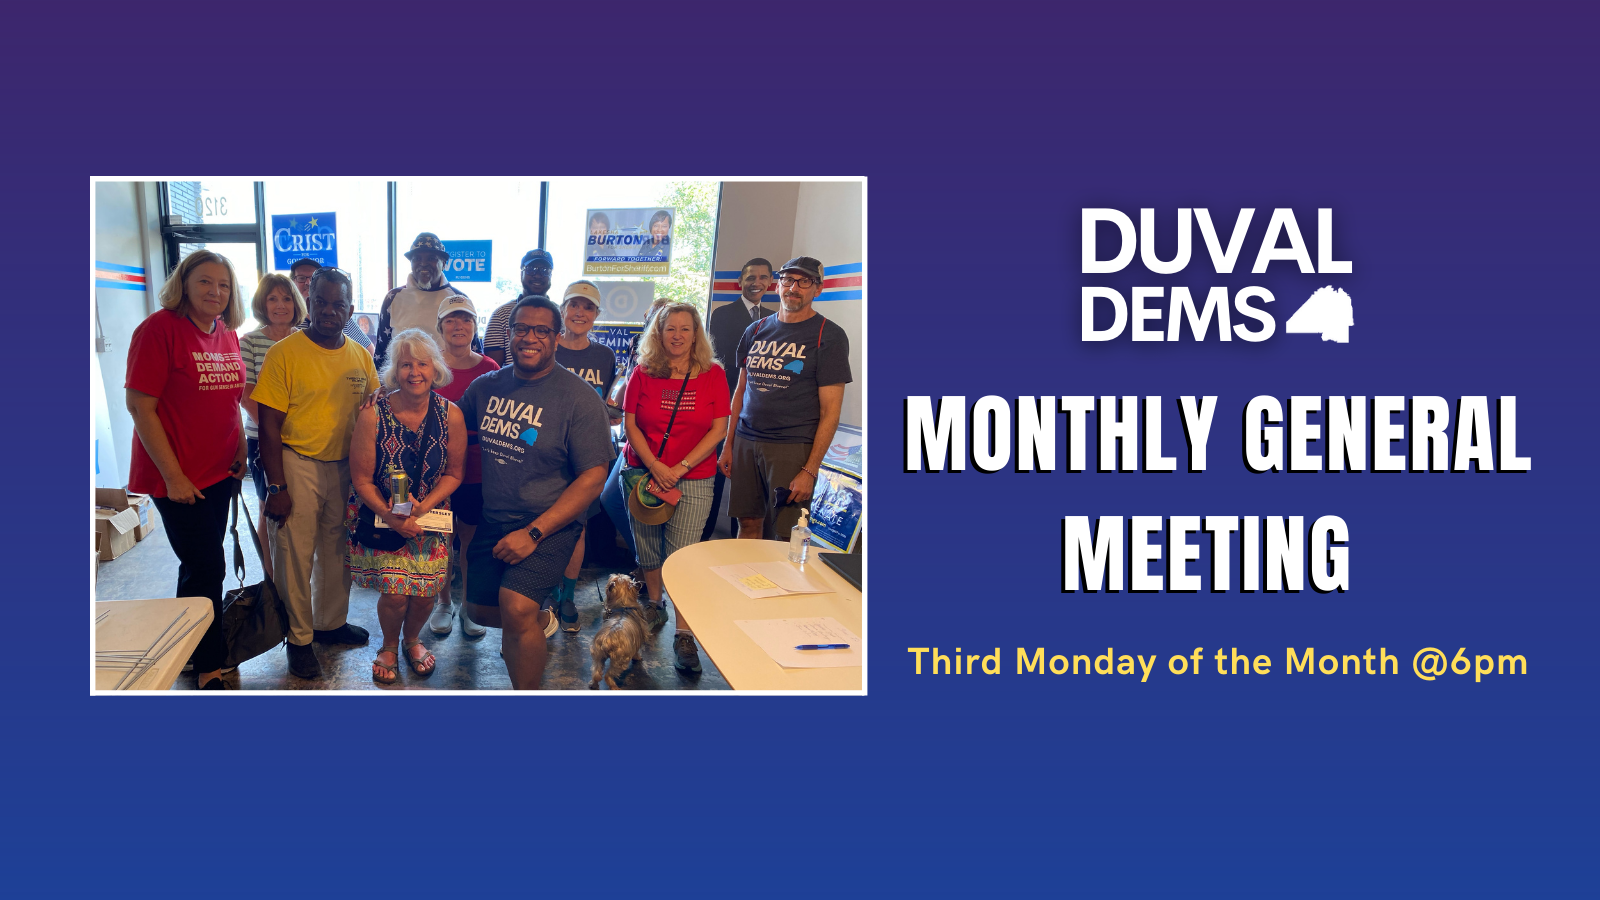 Duval Dems Monthly General Meeting